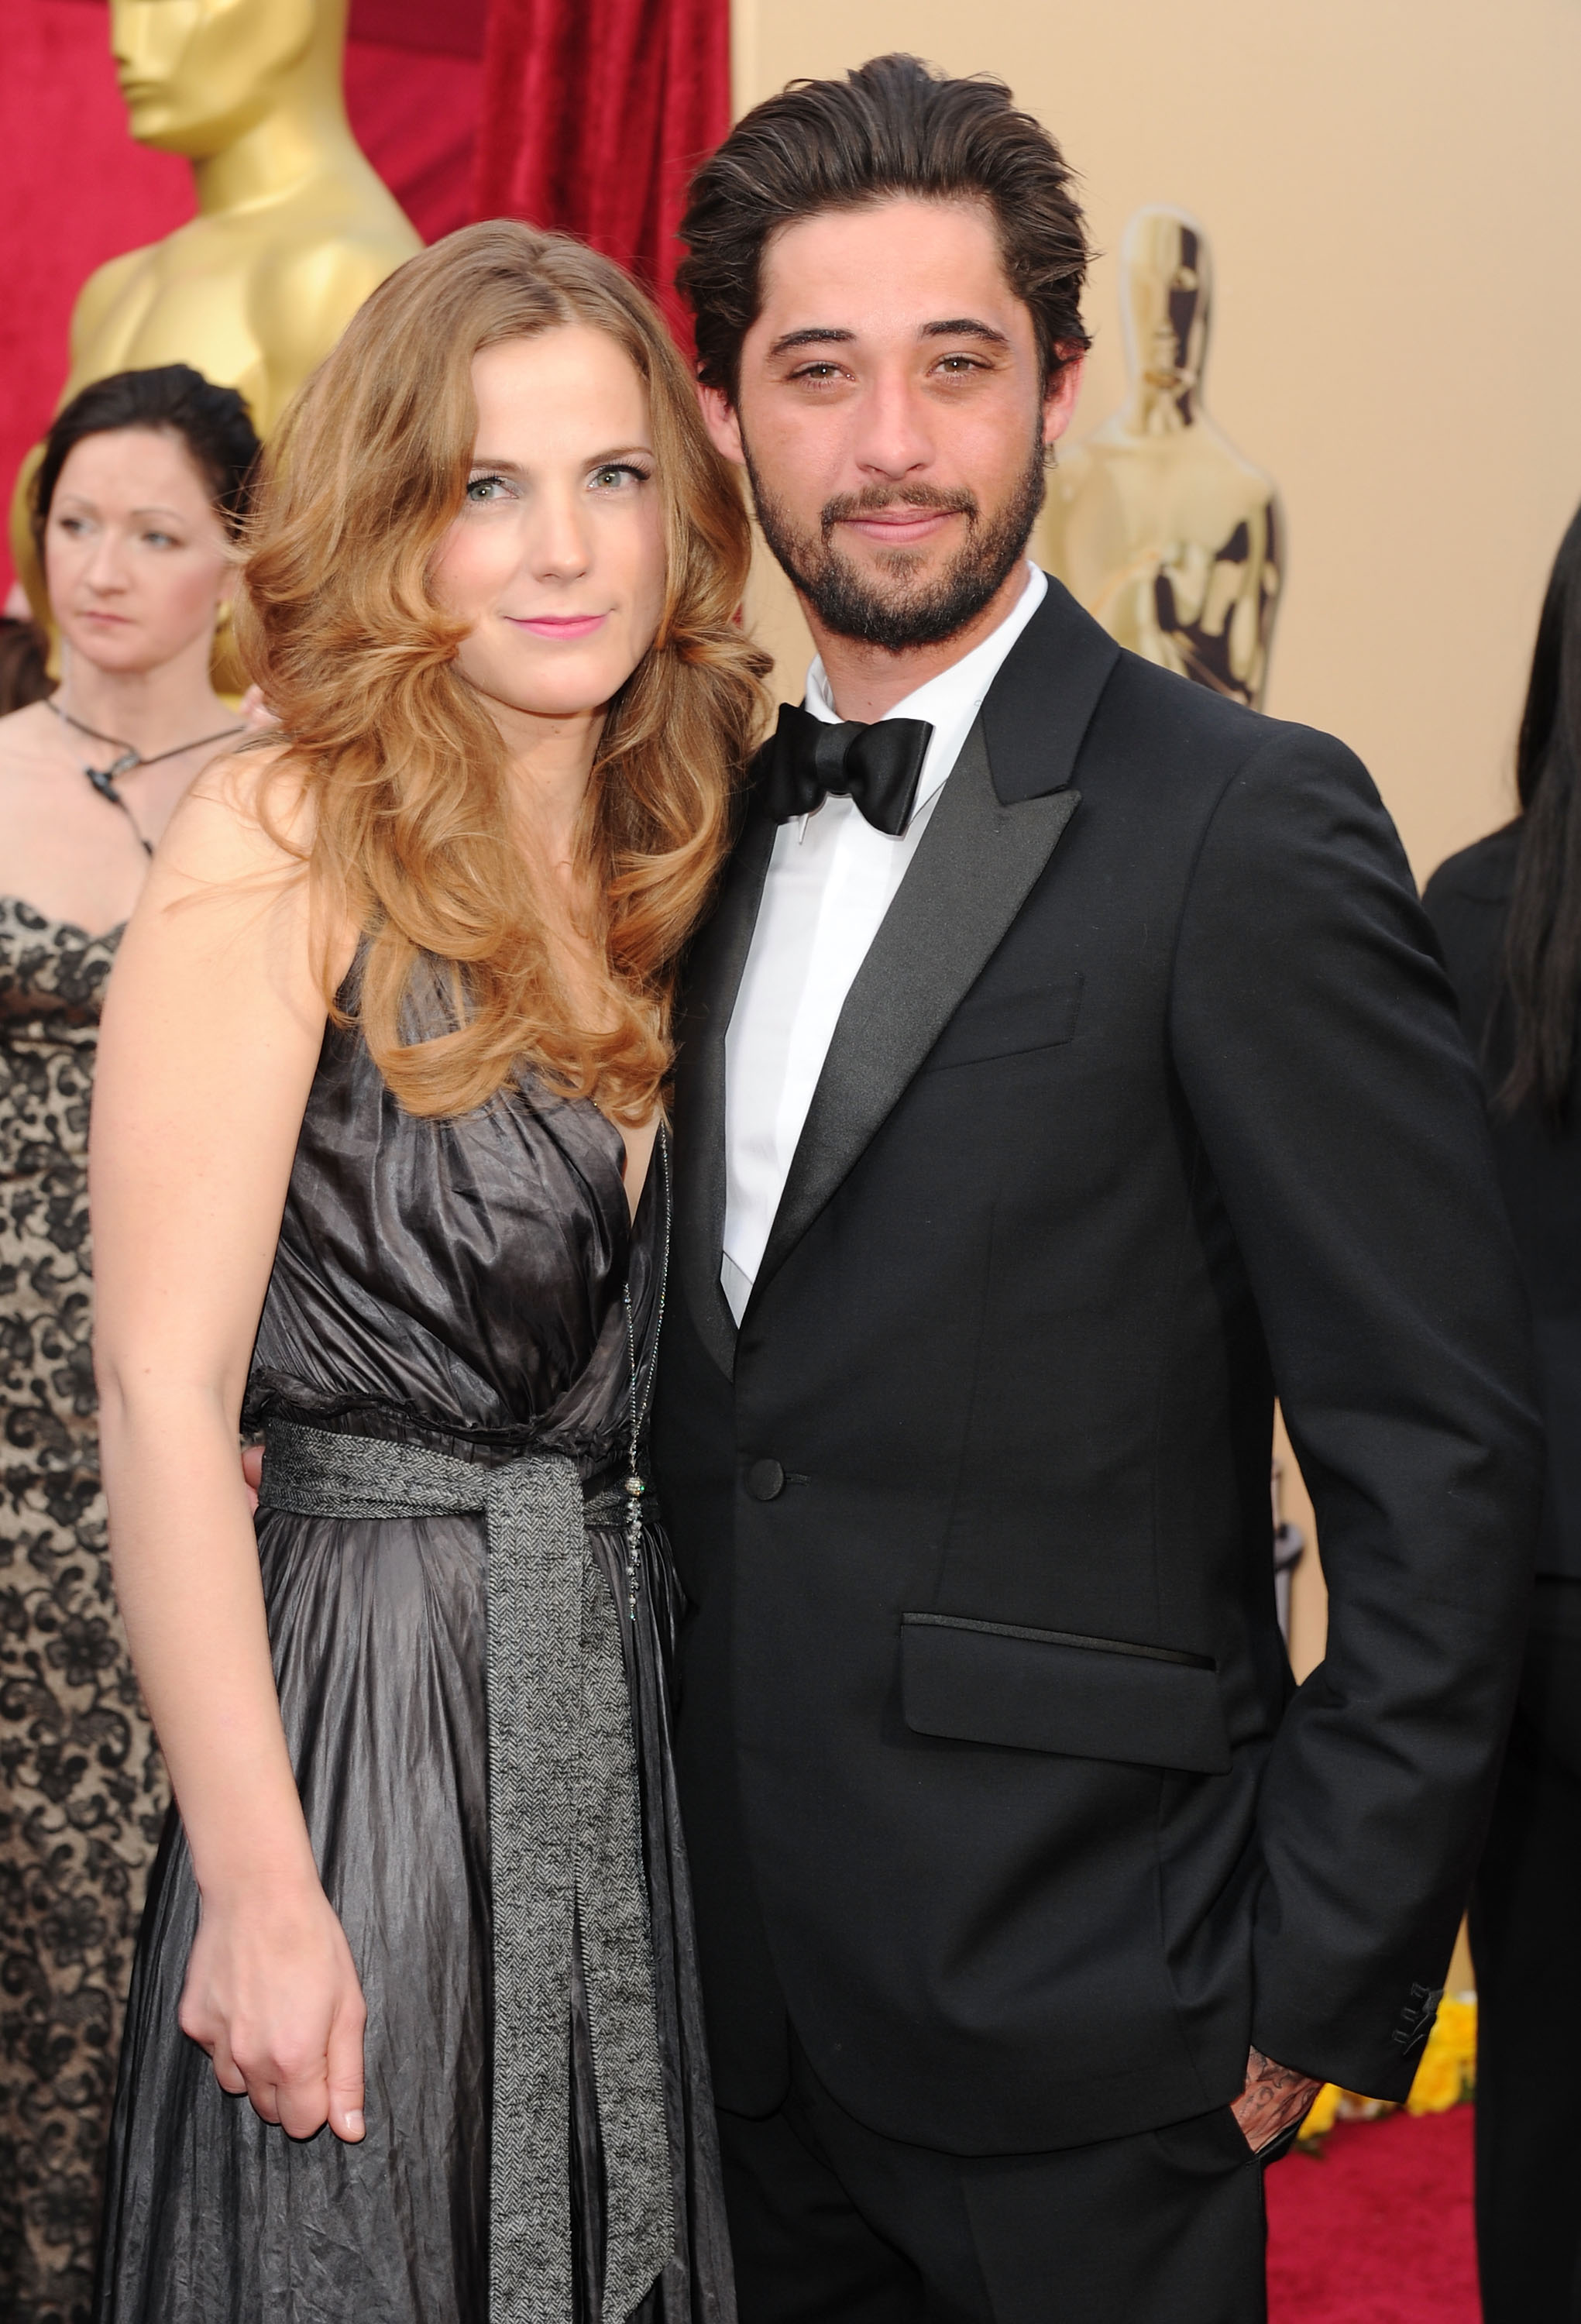 Ryan Bingham and Anna Axster are pictured as they arrive at the 82nd Annual Academy Awards held at Kodak Theatre on March 7, 2010, in Hollywood, California